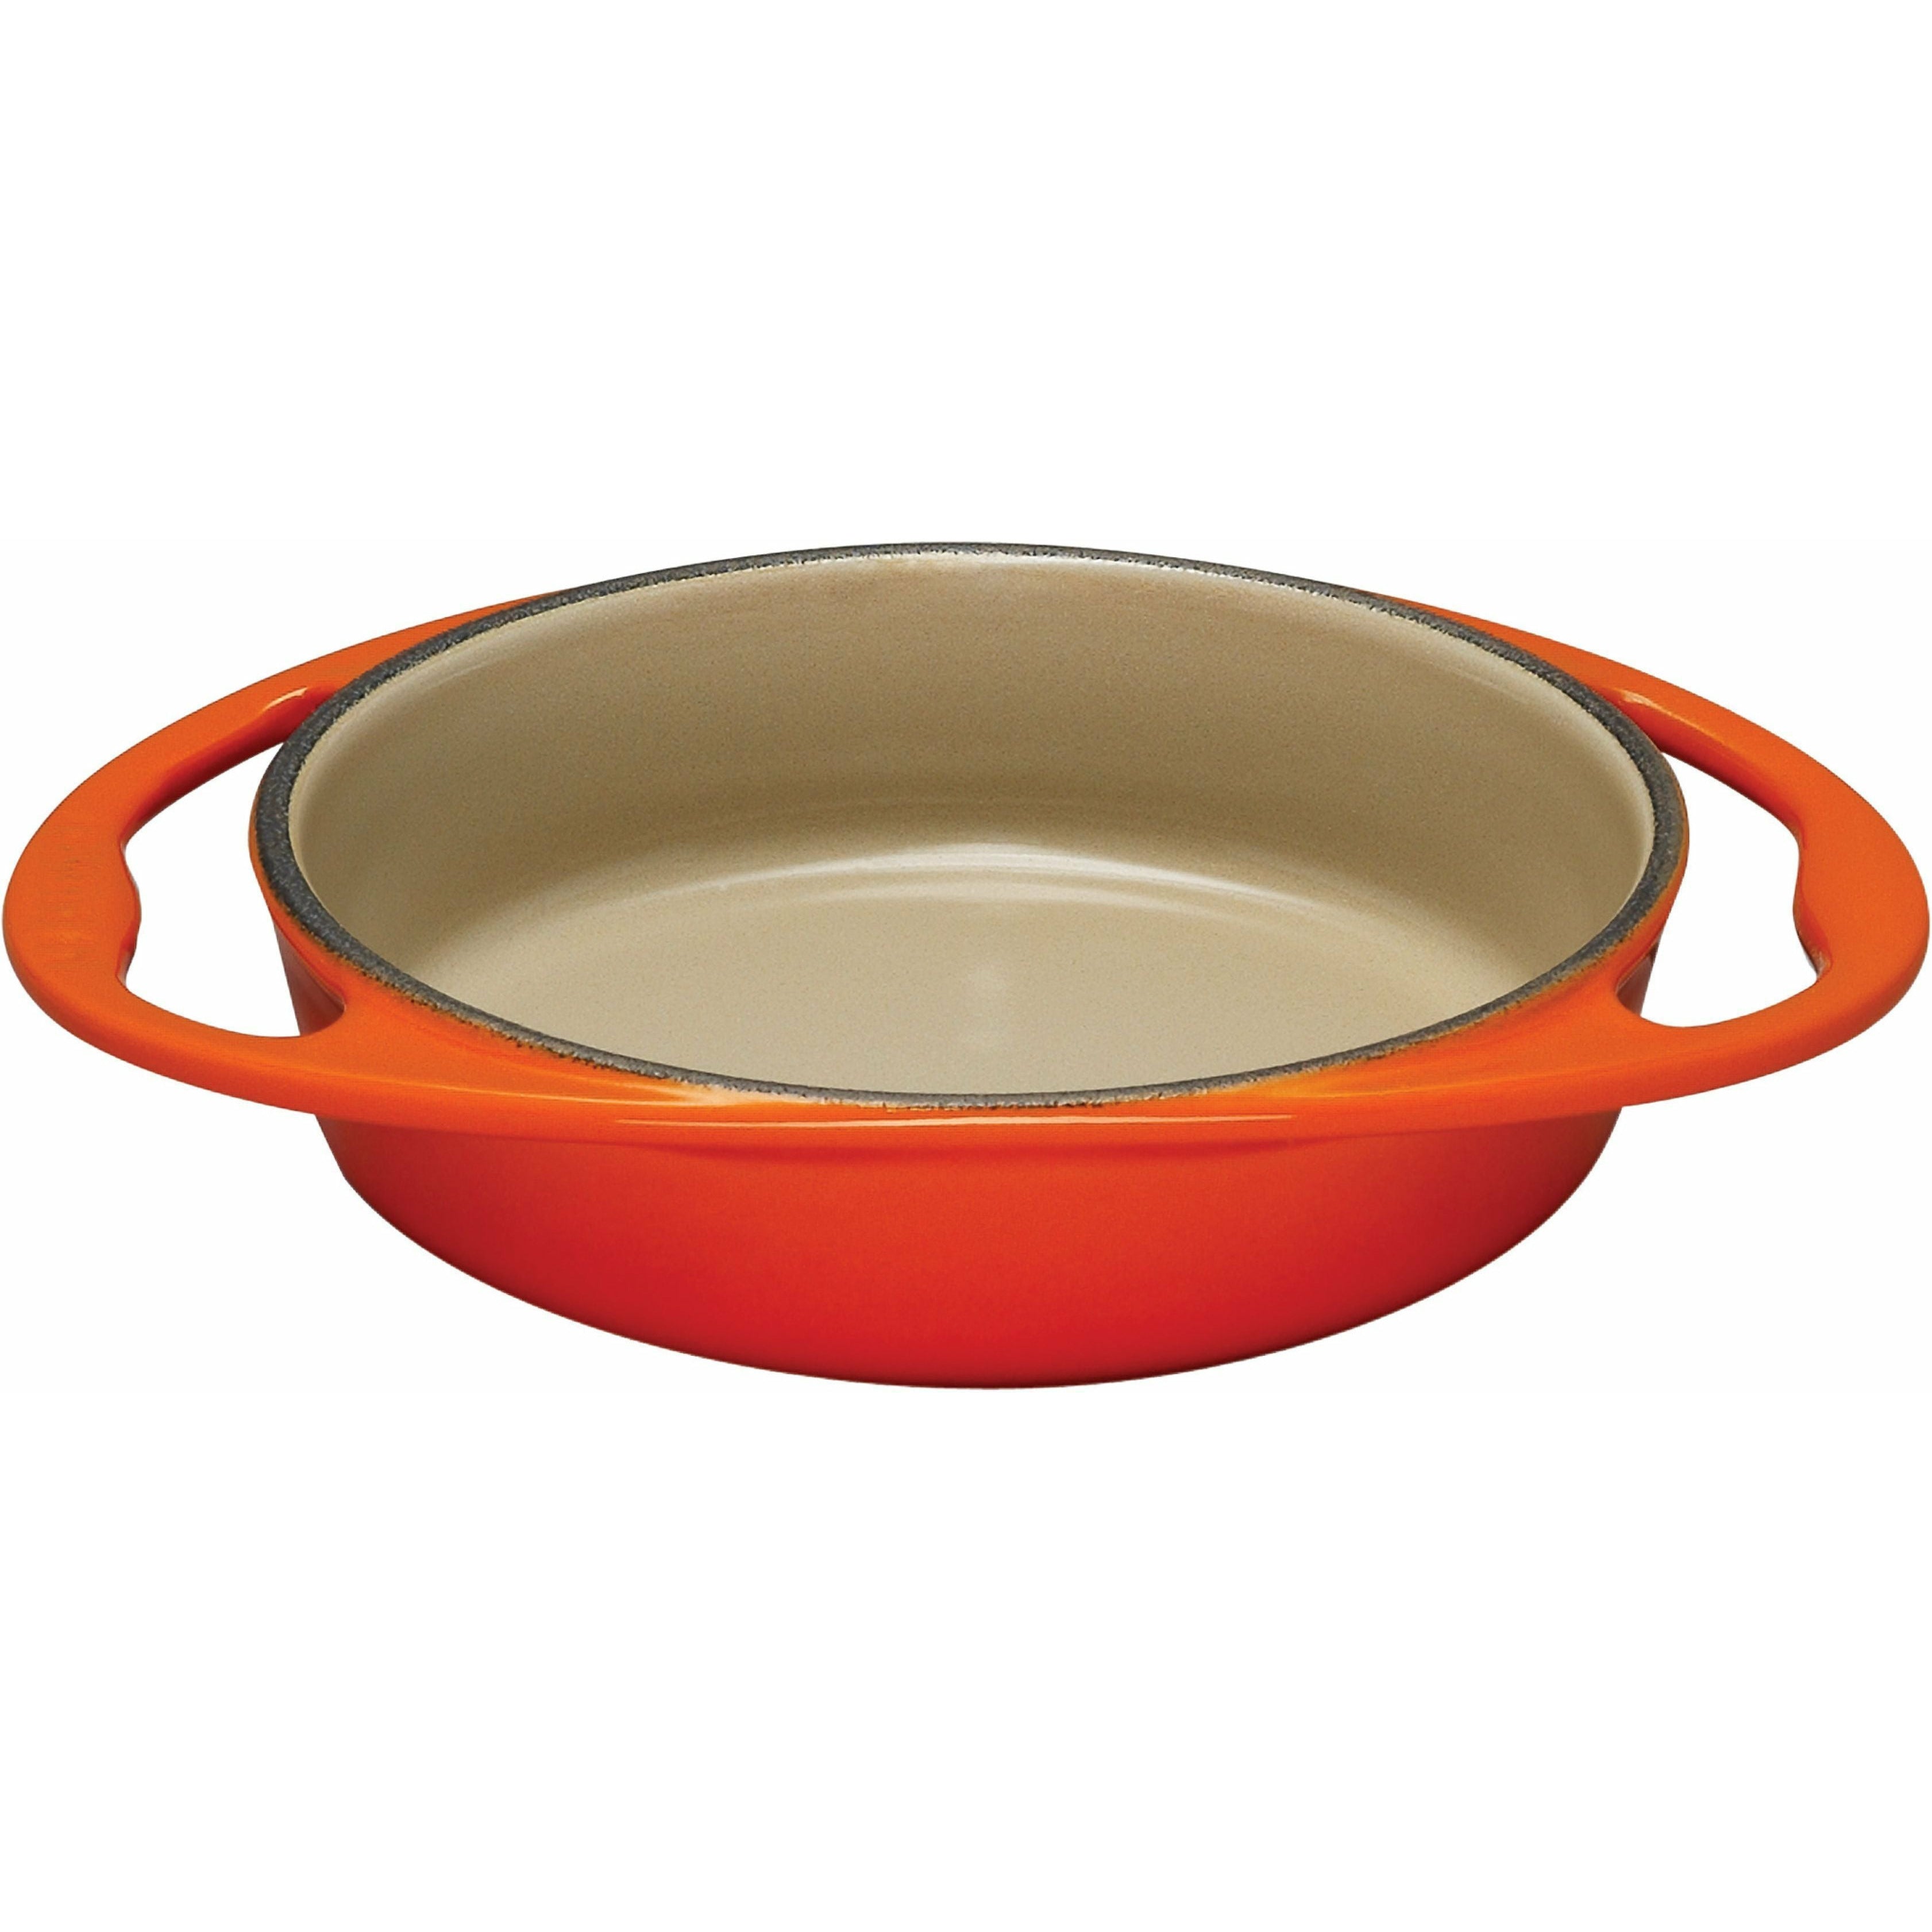 Le Creuset Tradition Tatin Baking Pan 28 Cm, Oven Red